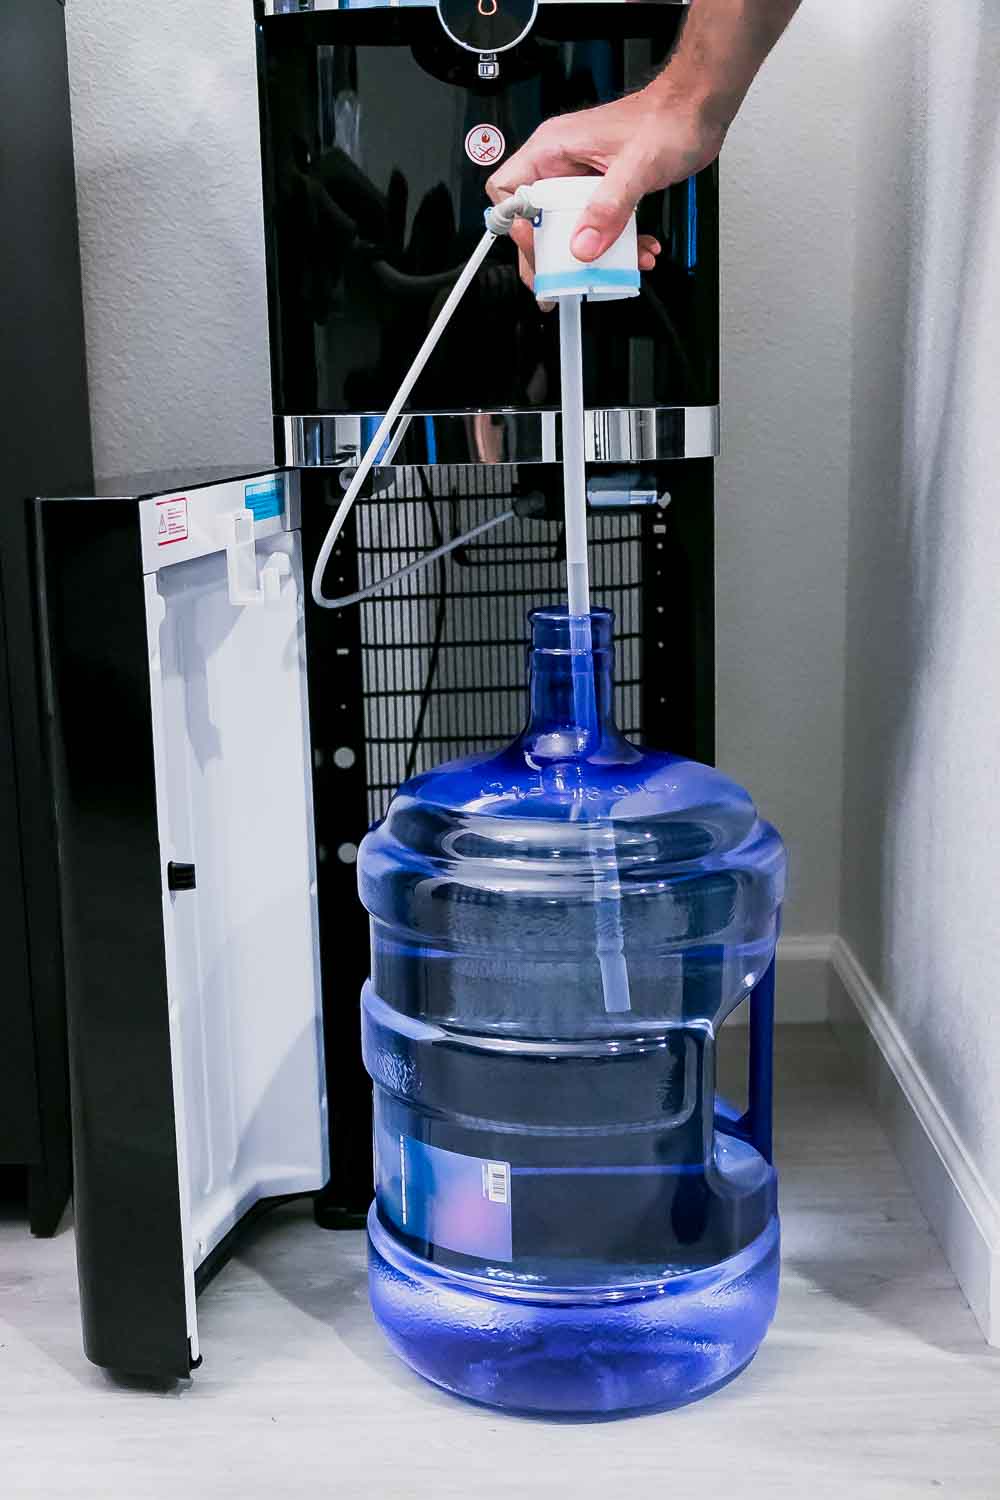 a 5-gallon water bottle hooked up to a primo water dispenser